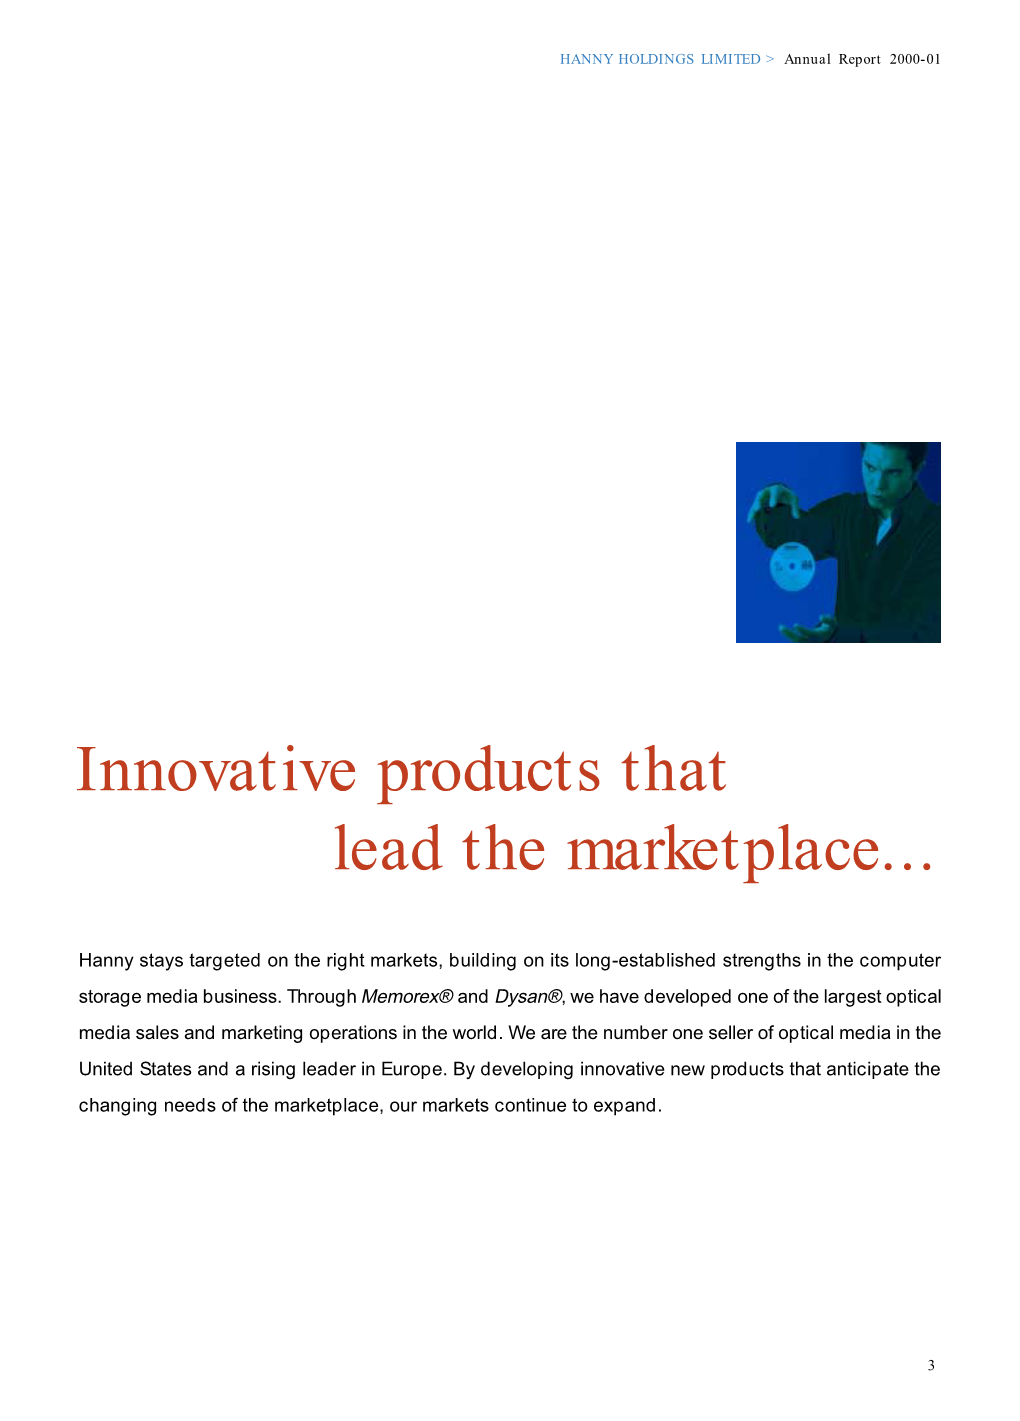 Innovative Products That Lead the Marketplace